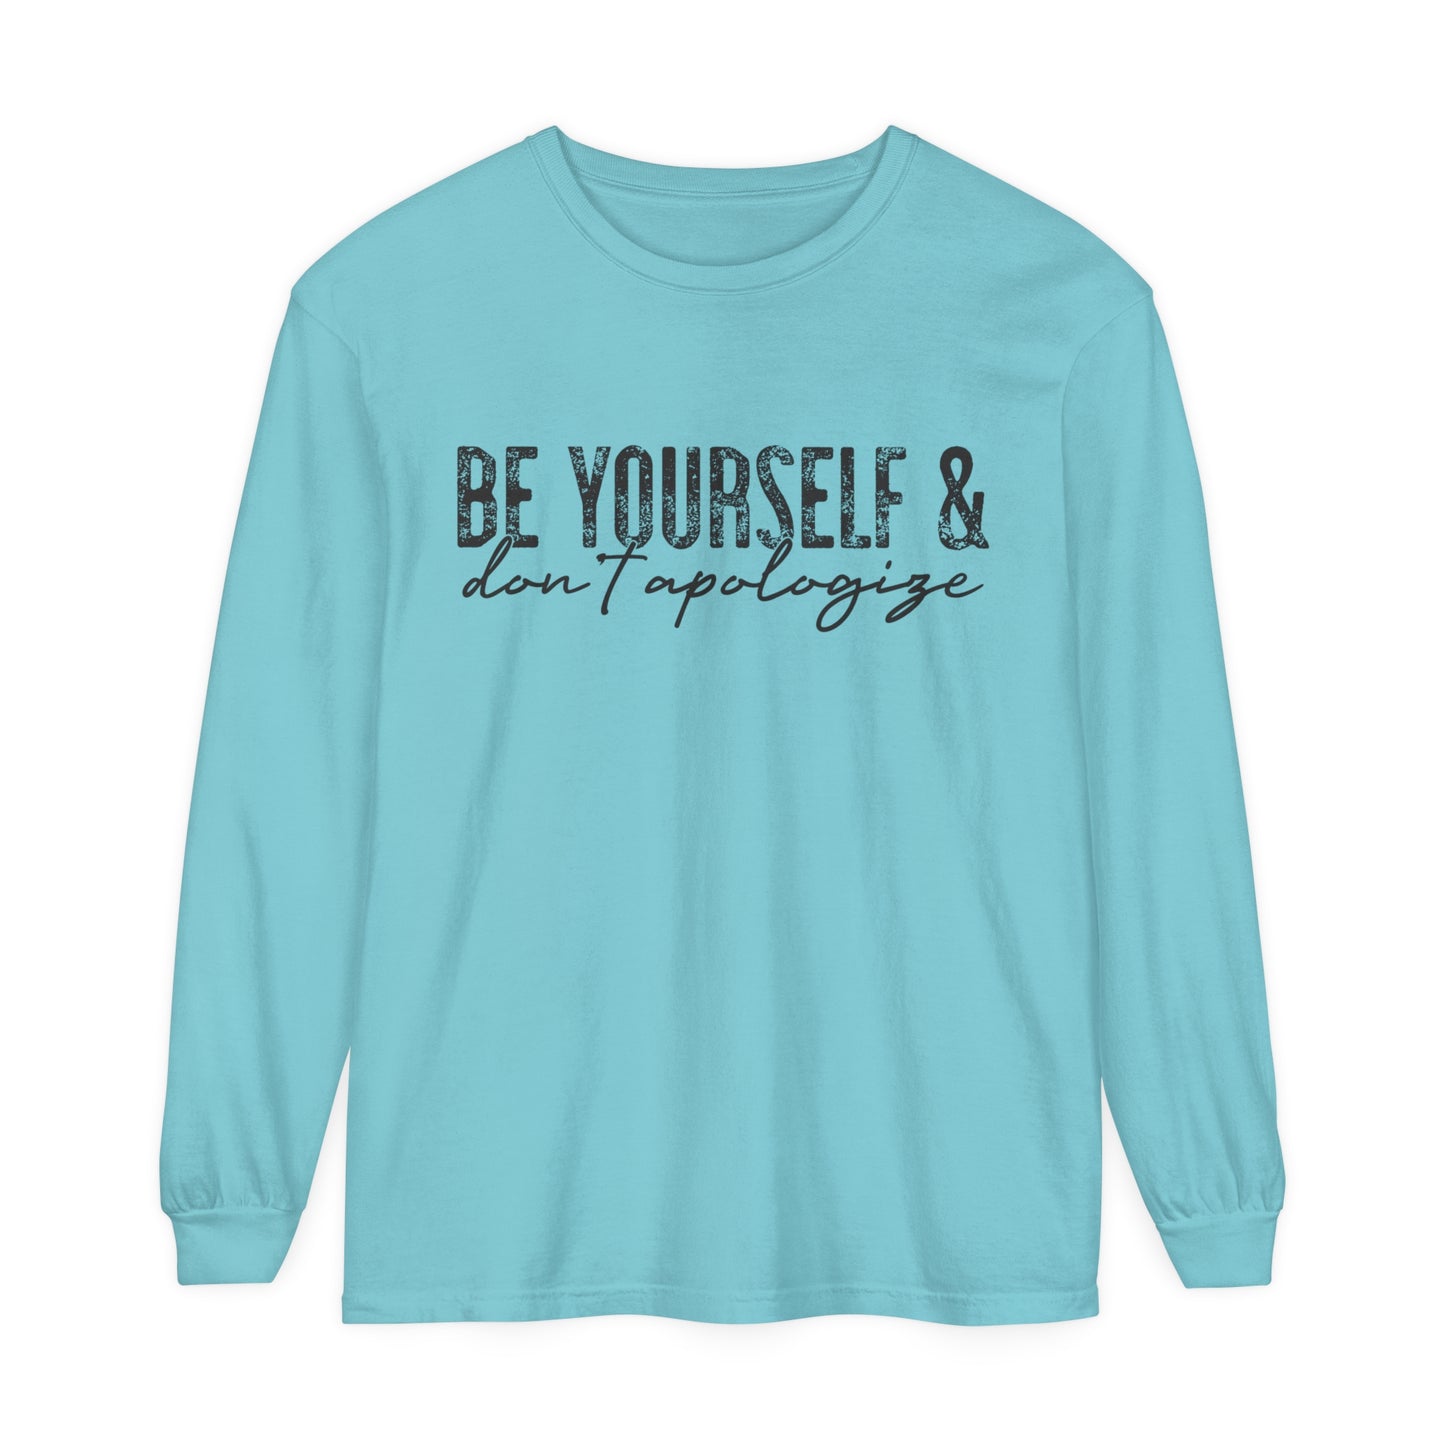 Be yourself and don't apologize Women's Loose Long Sleeve T-Shirt